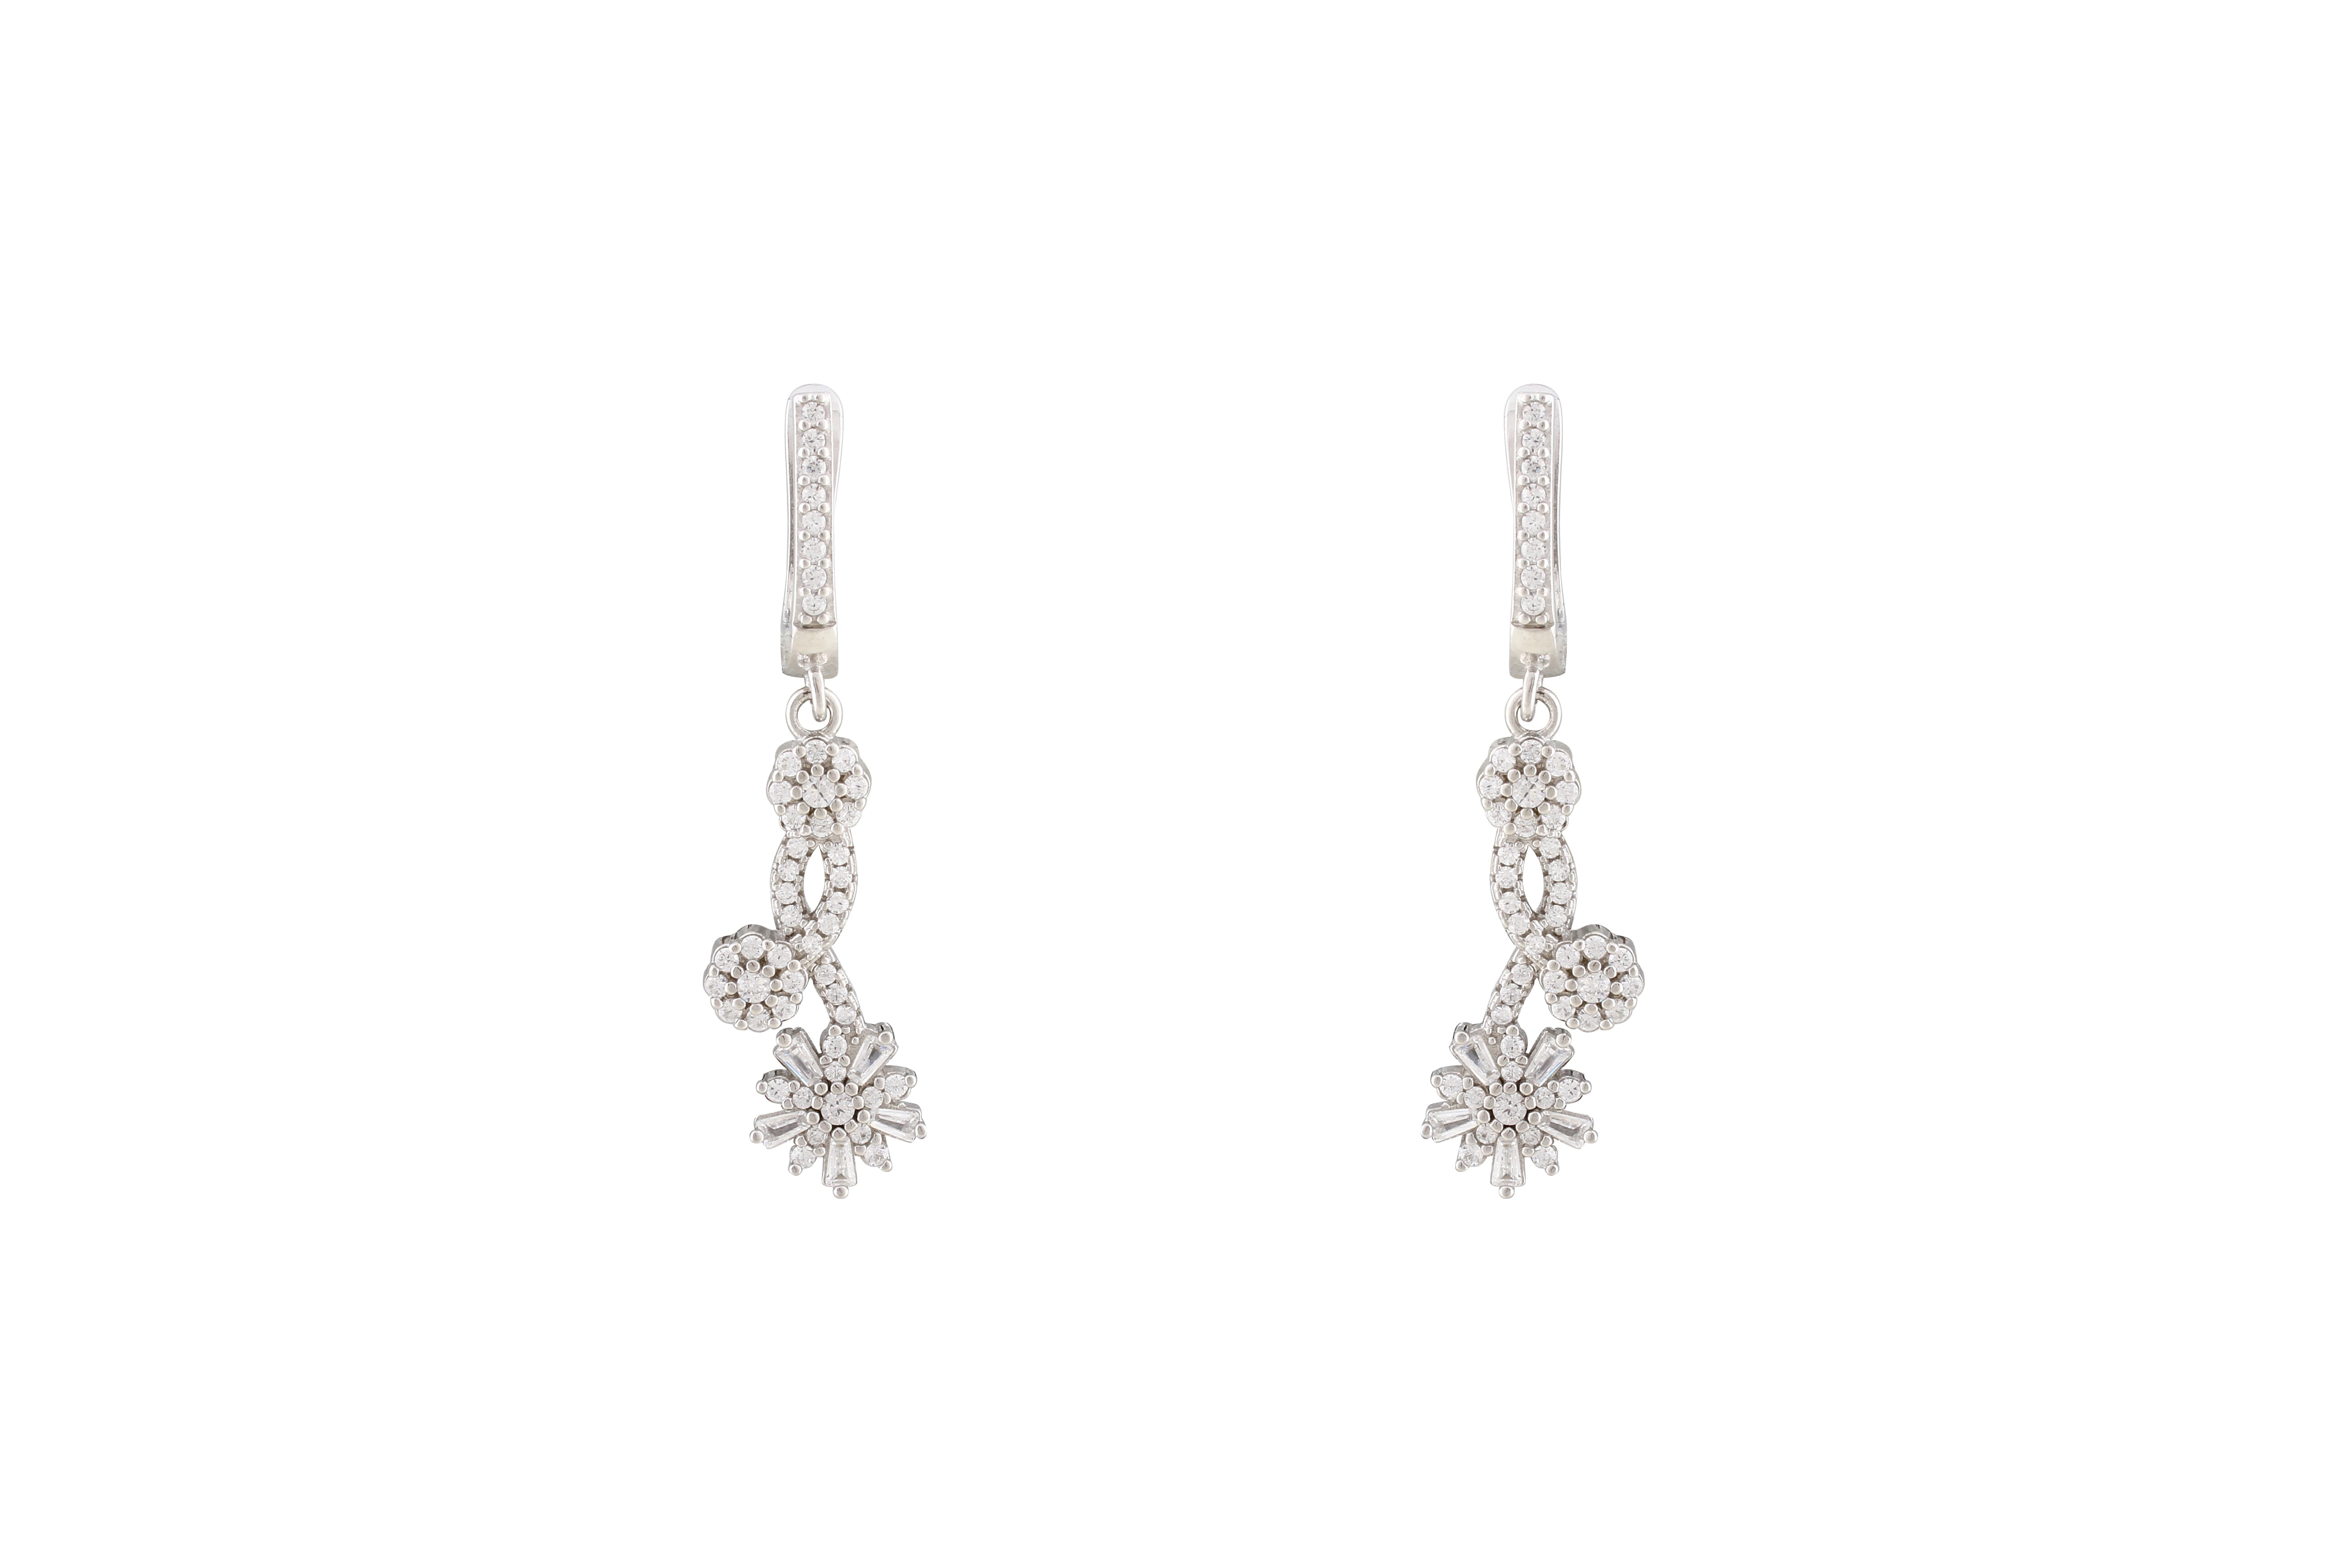 Asfour Crystal Clips Earrings With Art Deco Design In 925 Sterling Silver ER0433